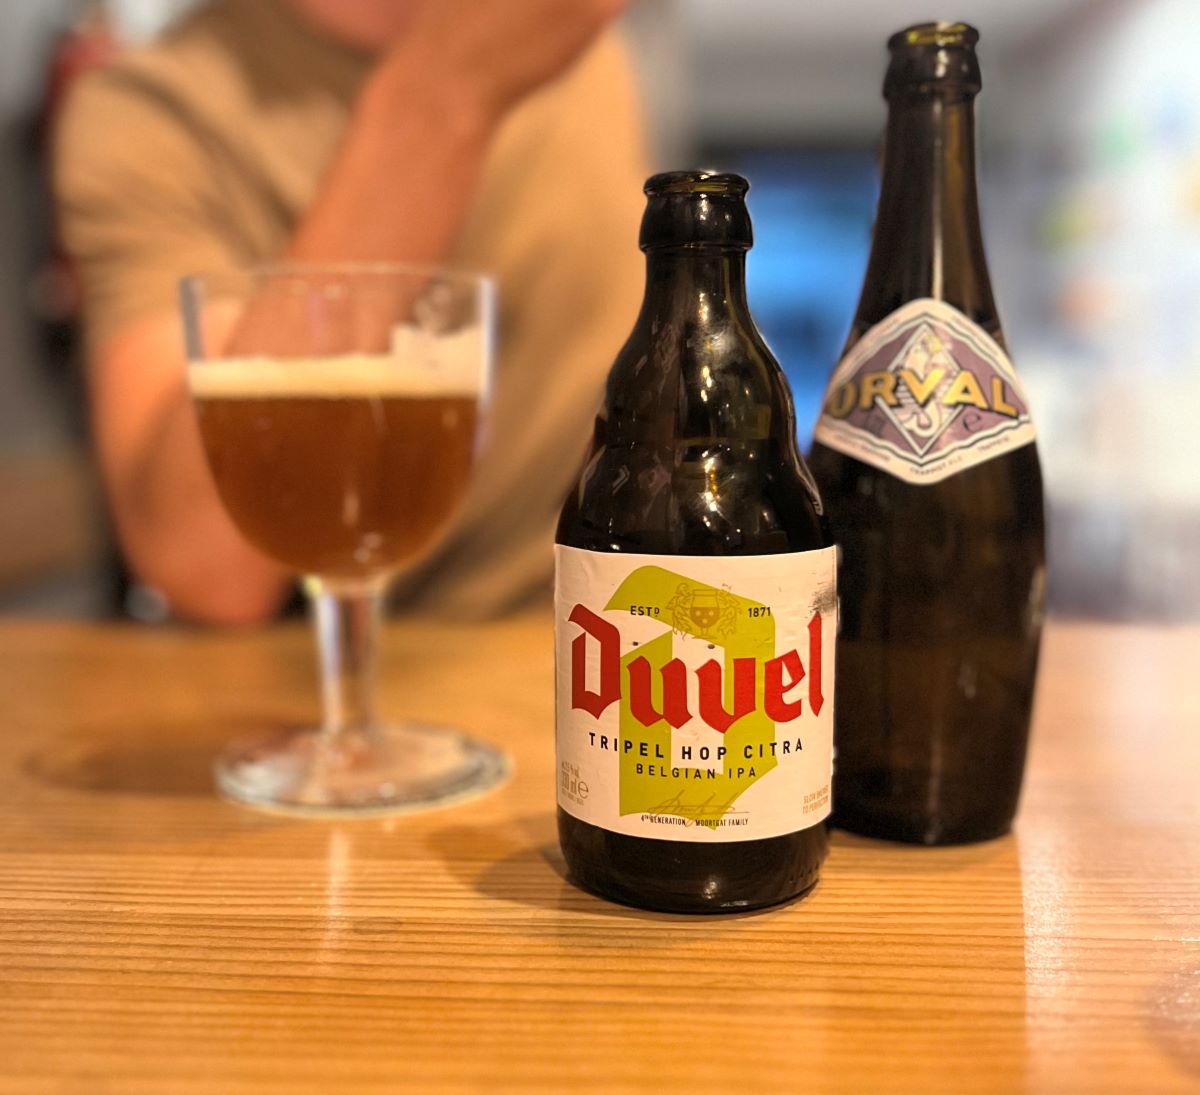 Duval and Orval beers